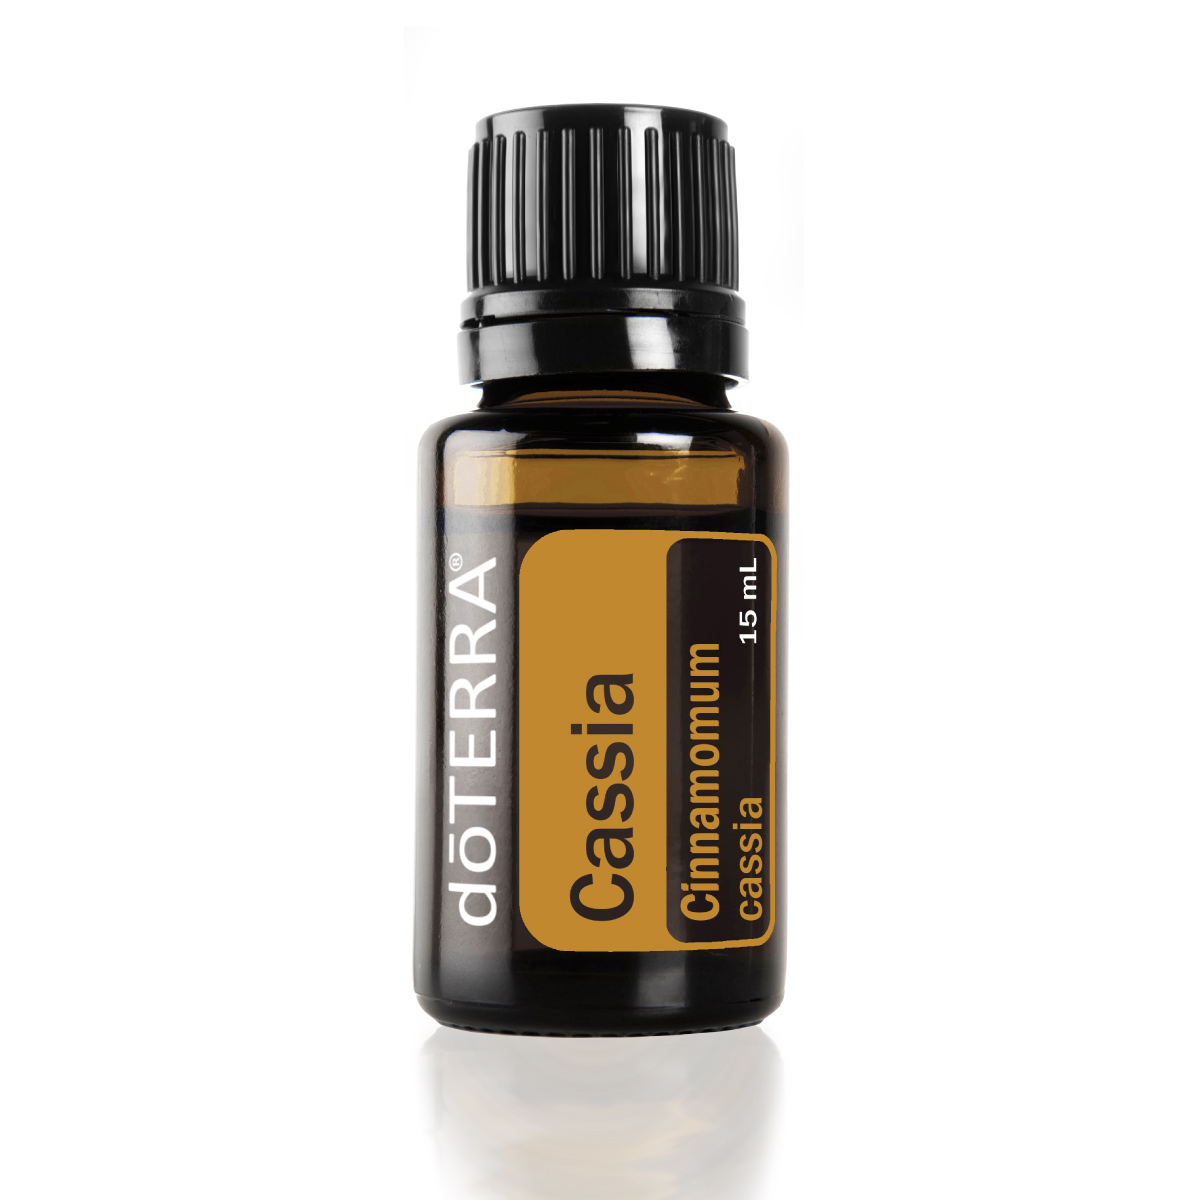 Bottle of doTERRA Cassia essential oil. What is Cassia oil used for? doTERRA Cassia oil can be used for internal benefits, as part of a warming massage, or to create a positive effect on mood.